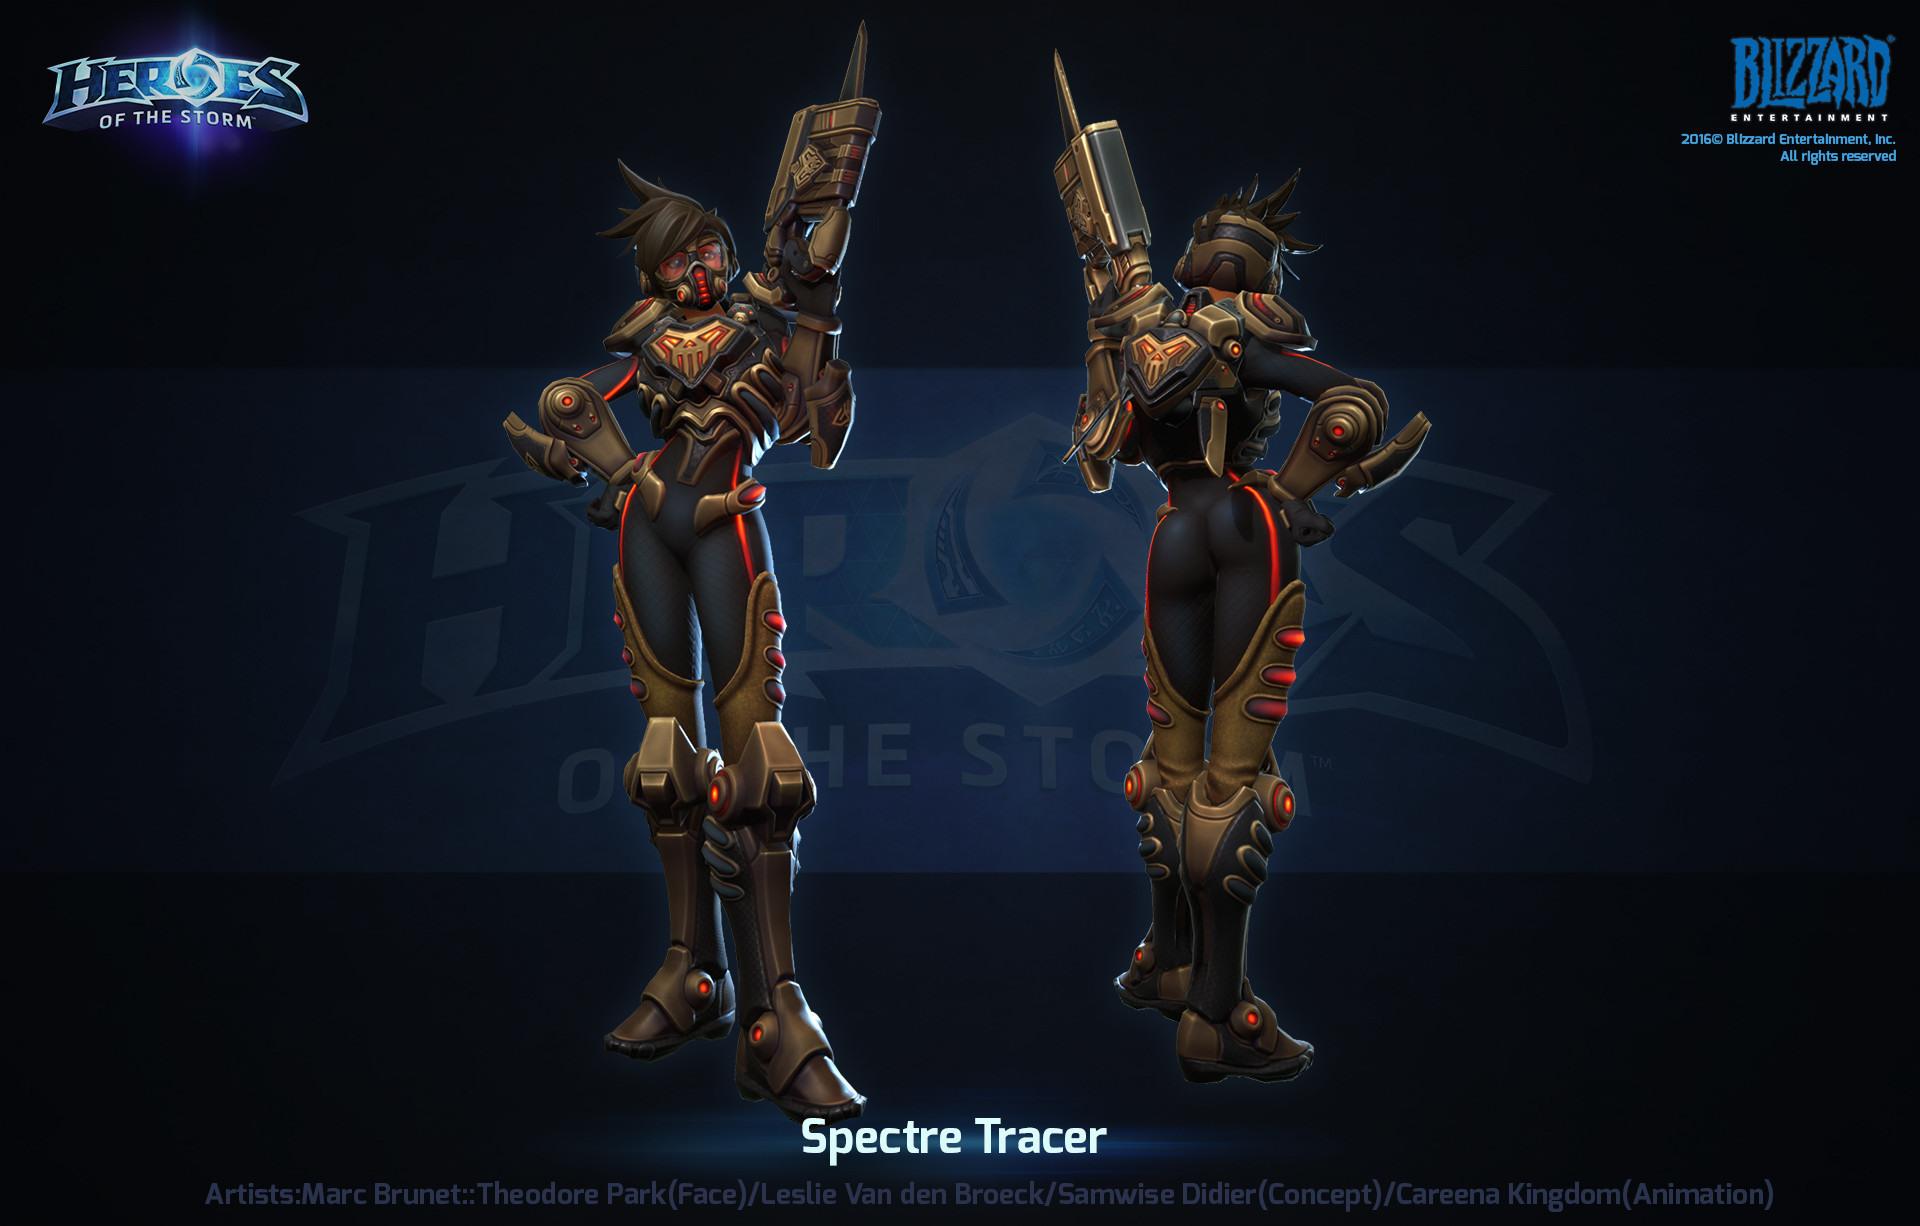 Take a look at Overwatch's Tracer in Heroes of the Storm